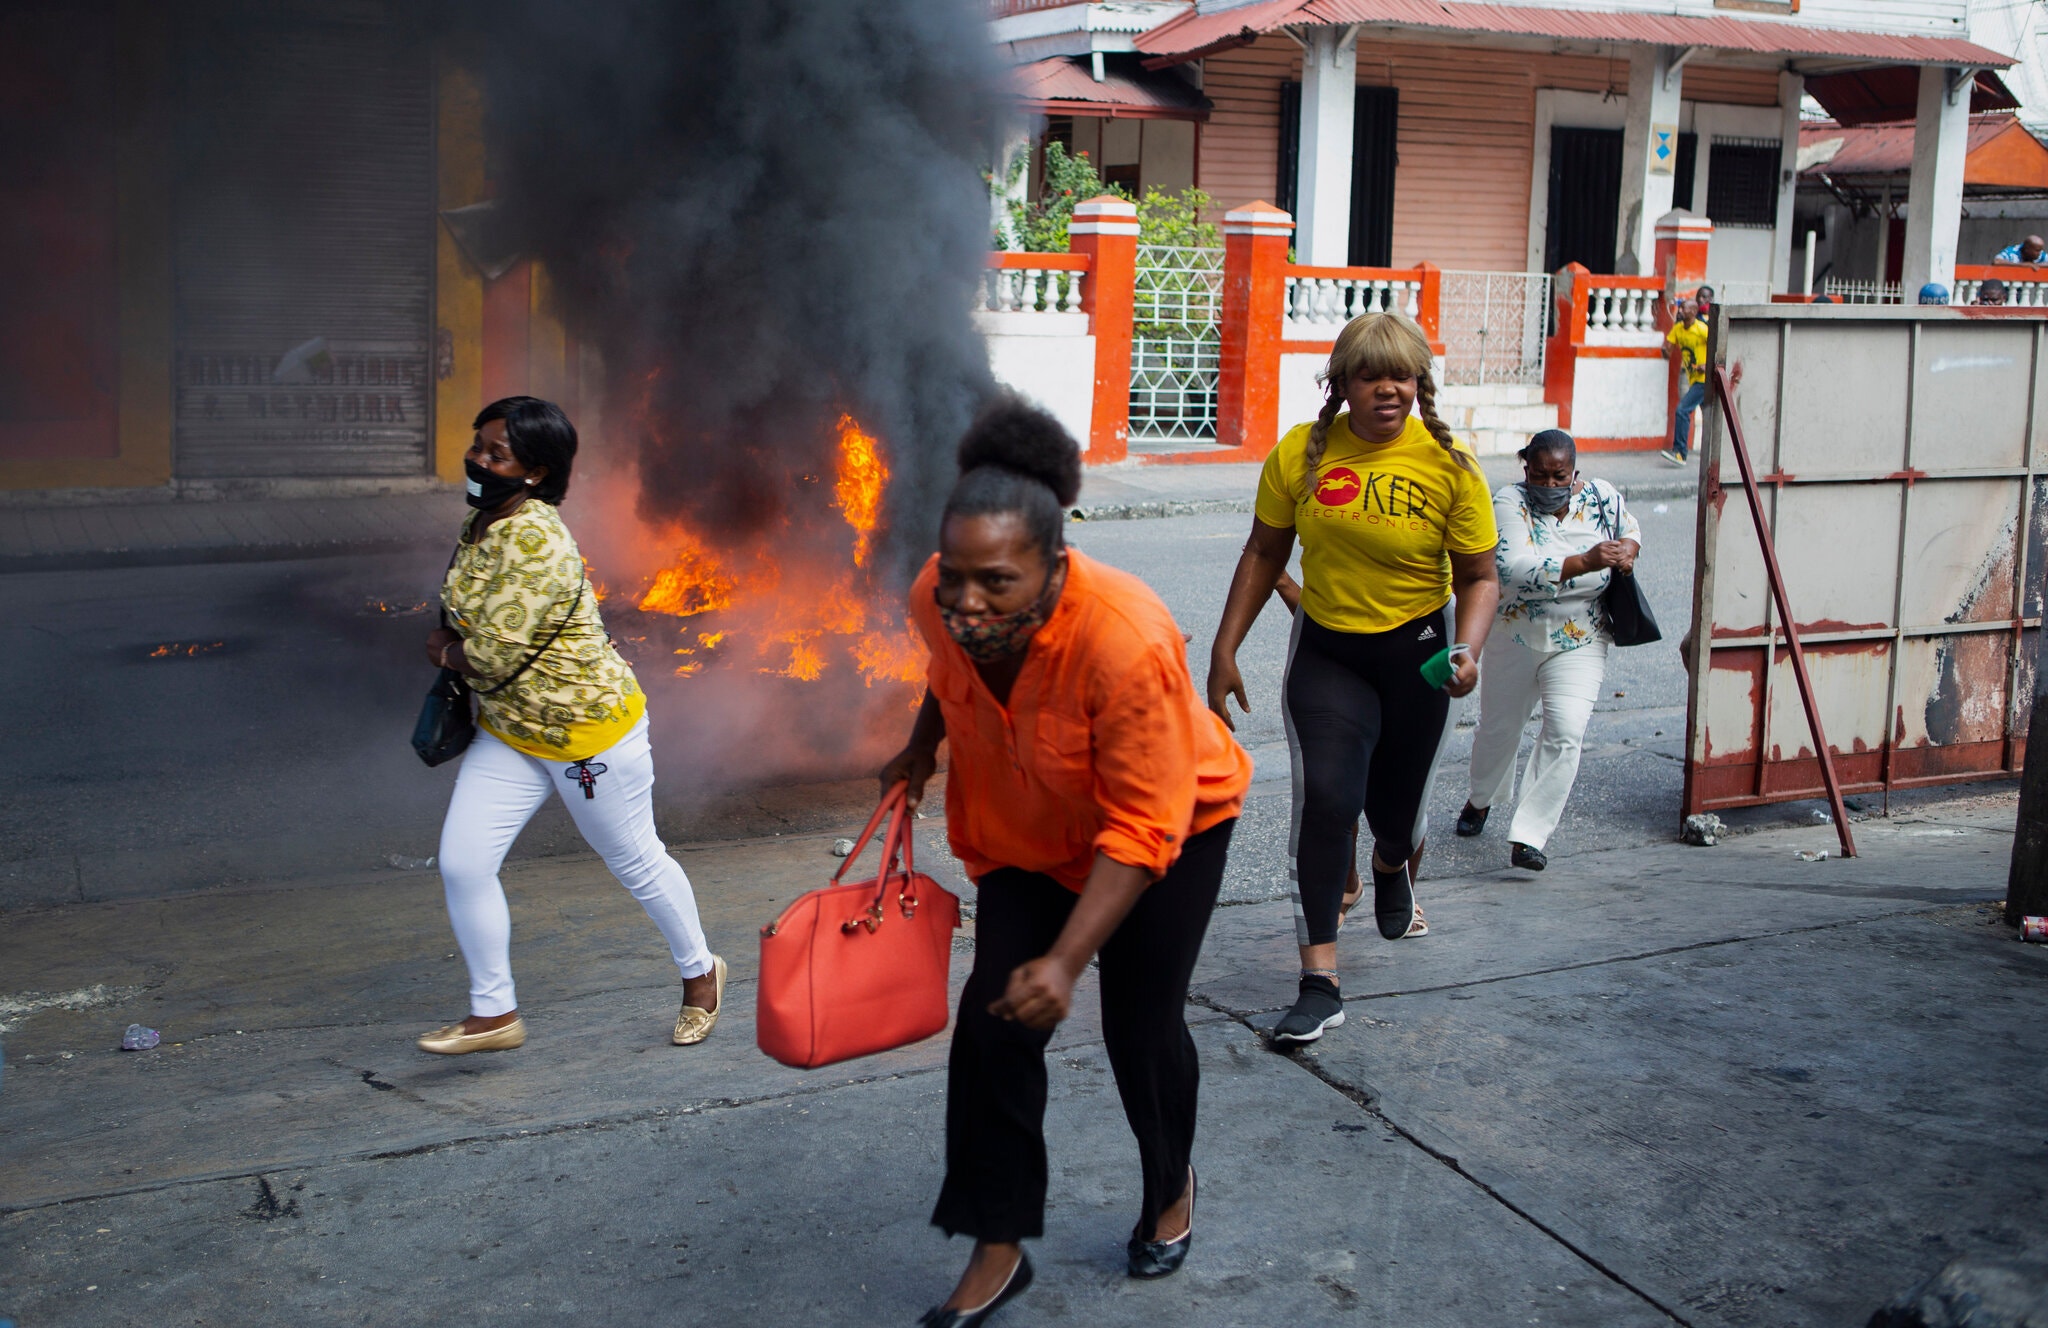 A burning barricade in Port-au-Prince during a demonstration calling for Haiti’s president to resign.